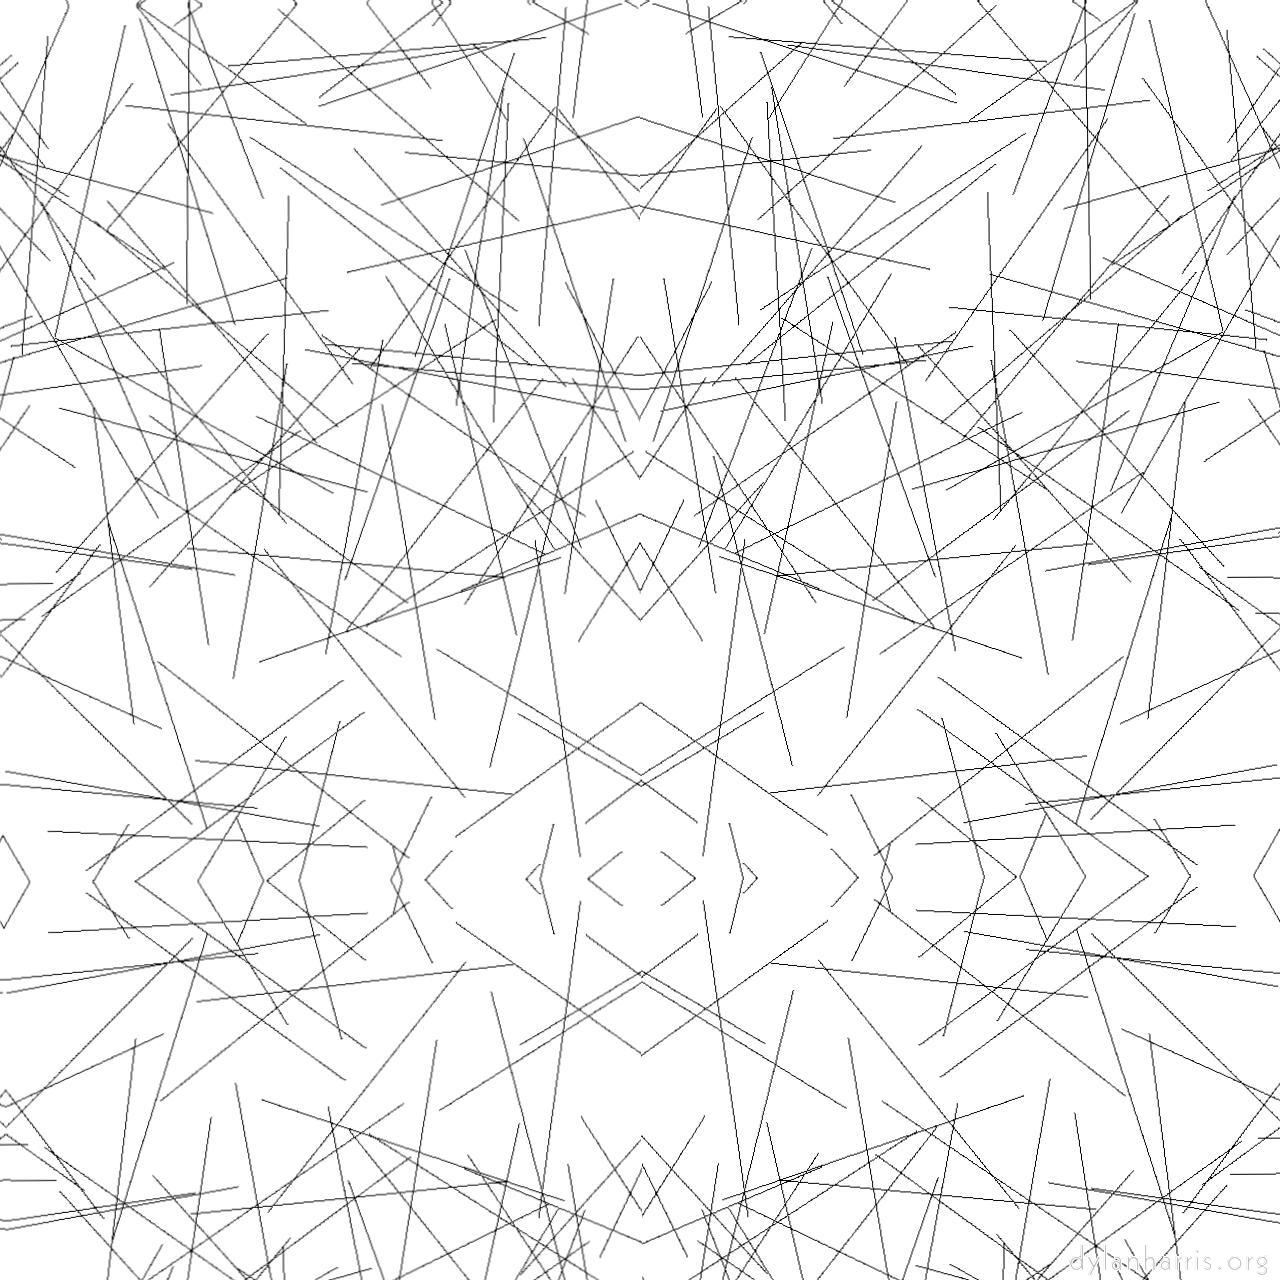 image: storage presets :: abstract line drawing 2